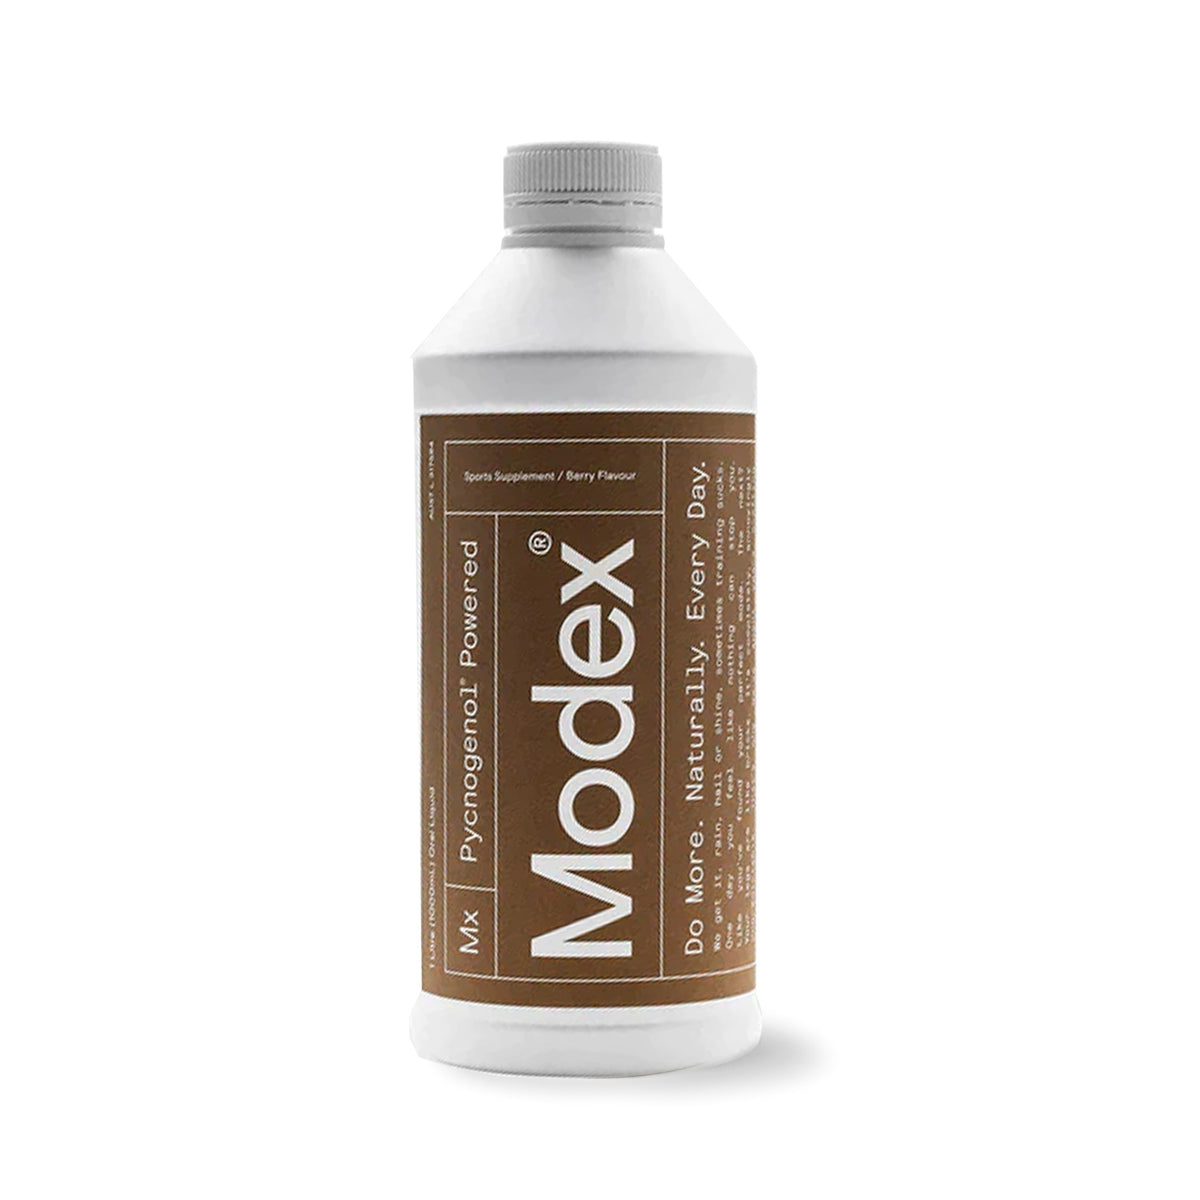 Modex Daily Performance Nutrition